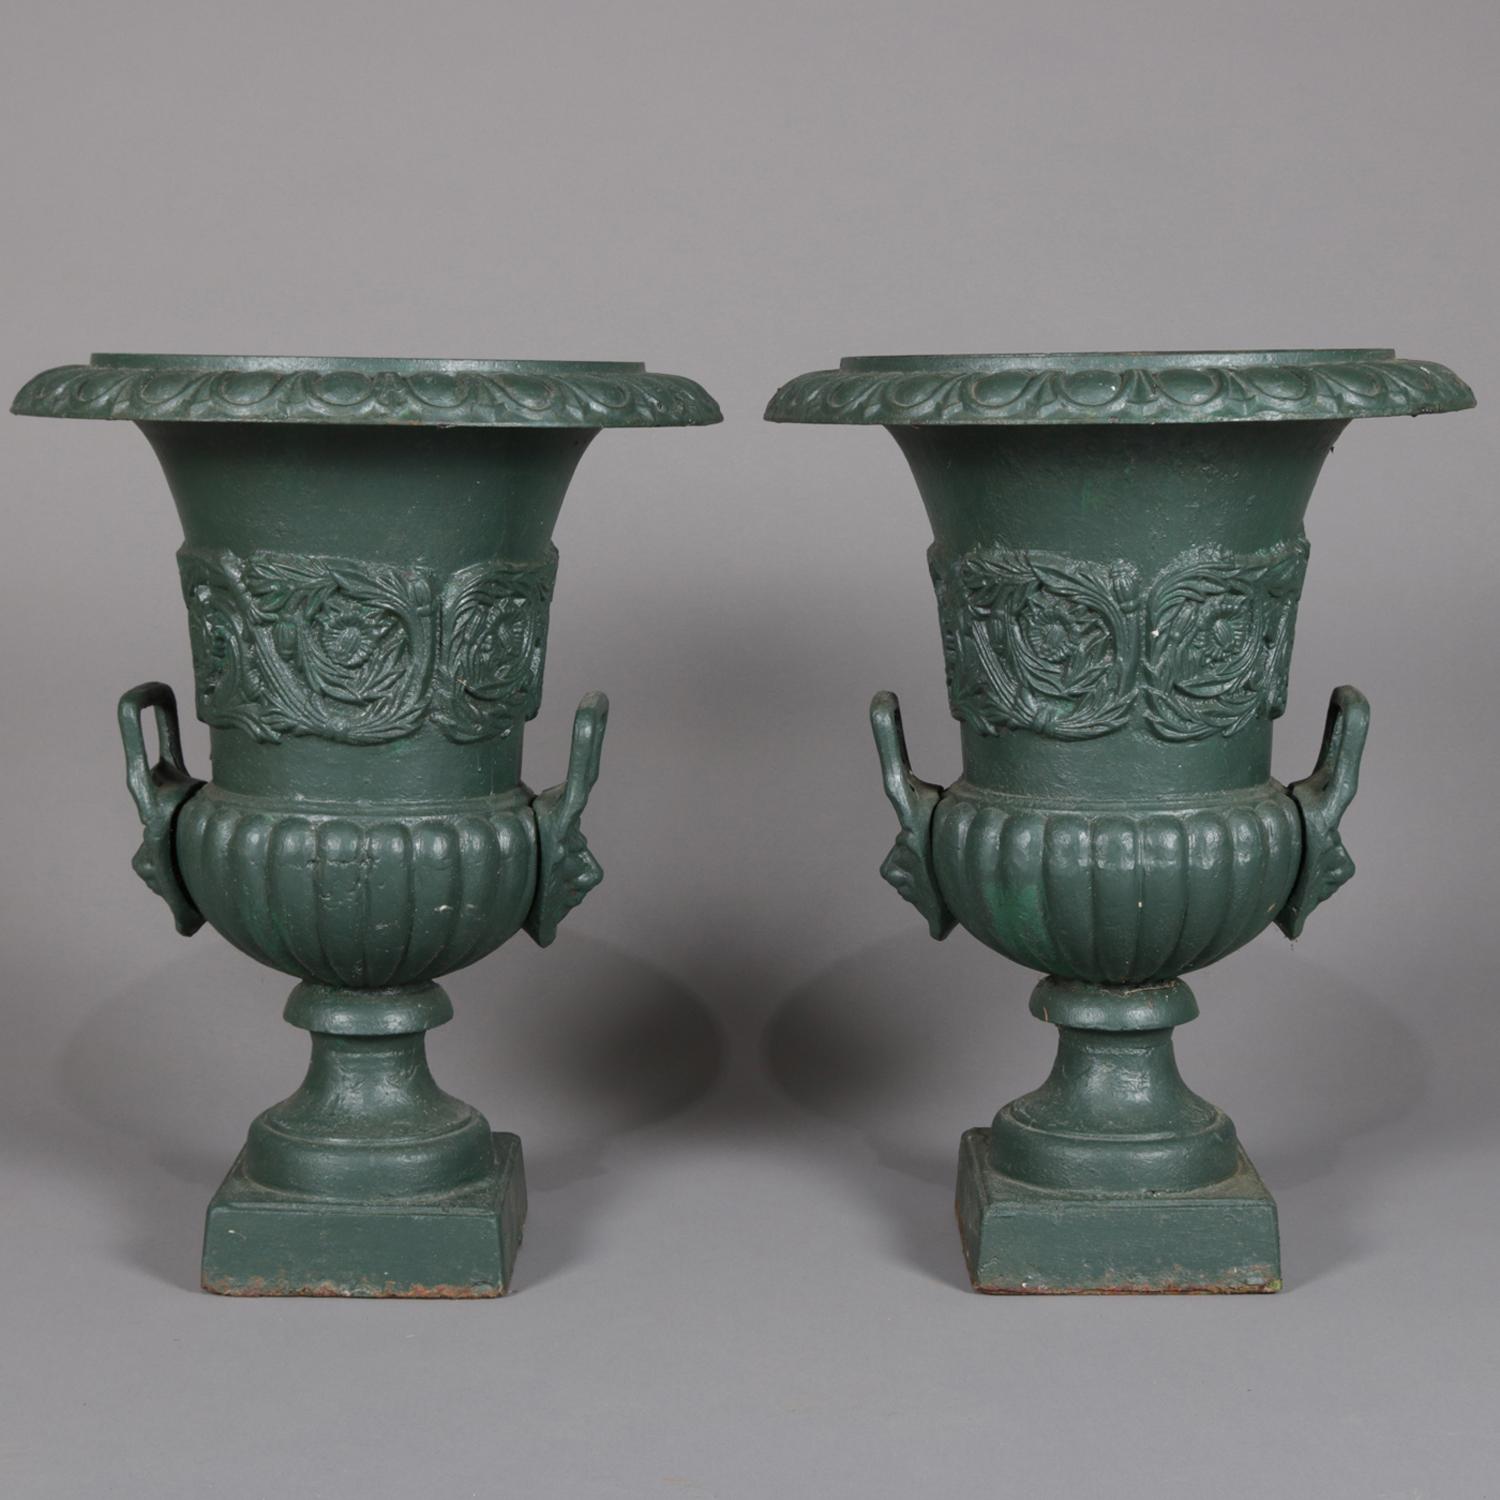 A pair of well cast Classical garden planters feature iron construction in pedestal urn form having double handles, reeded bowl bases and bands of high relief foliate decoration, painted green, 20th century

Measures: 24.5